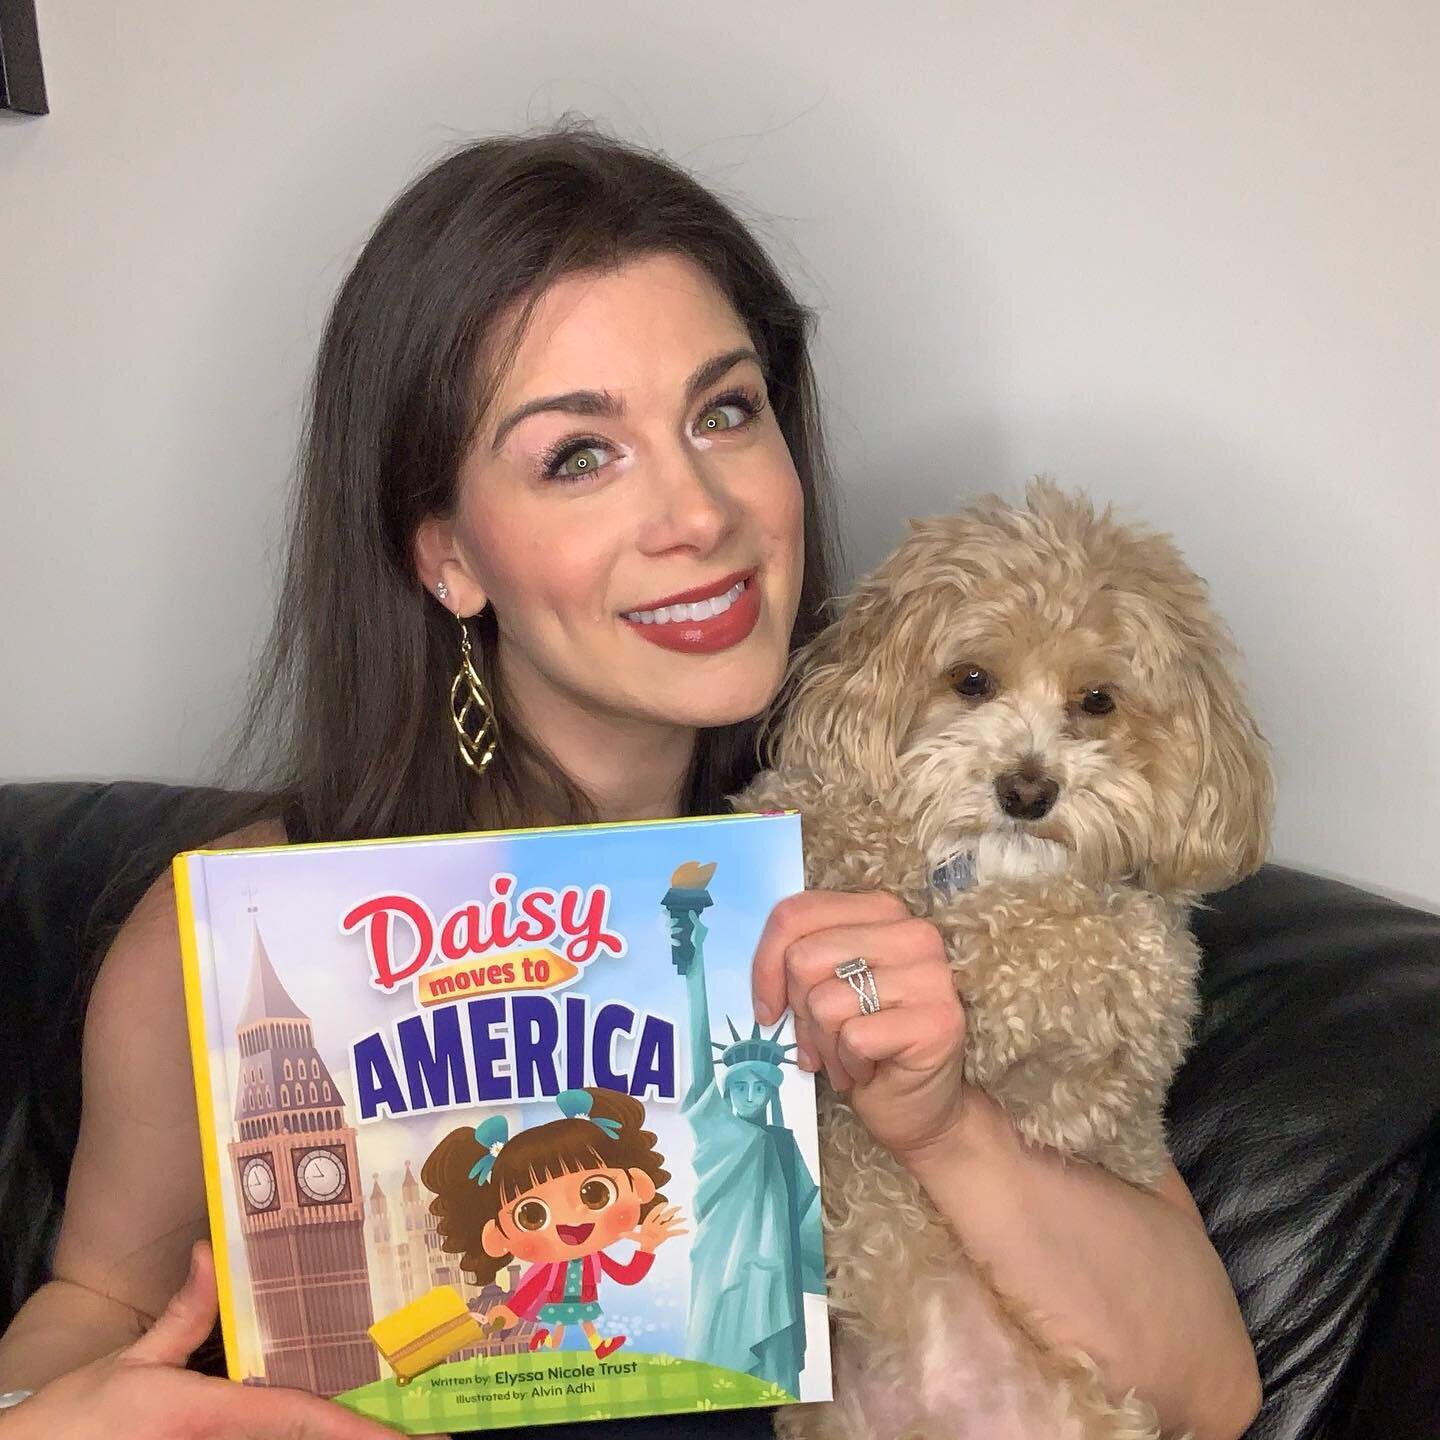 MEET THE HOST: Elyssa Nicole Trust!

Bonus episode coming tomorrow!

So excited to share&nbsp;@elyssanicoletrusts&rsquo;s episode with you. It was great to hear about the inspiration for her children&rsquo;s book &ldquo;Daisy Moves to America&rdquo; 